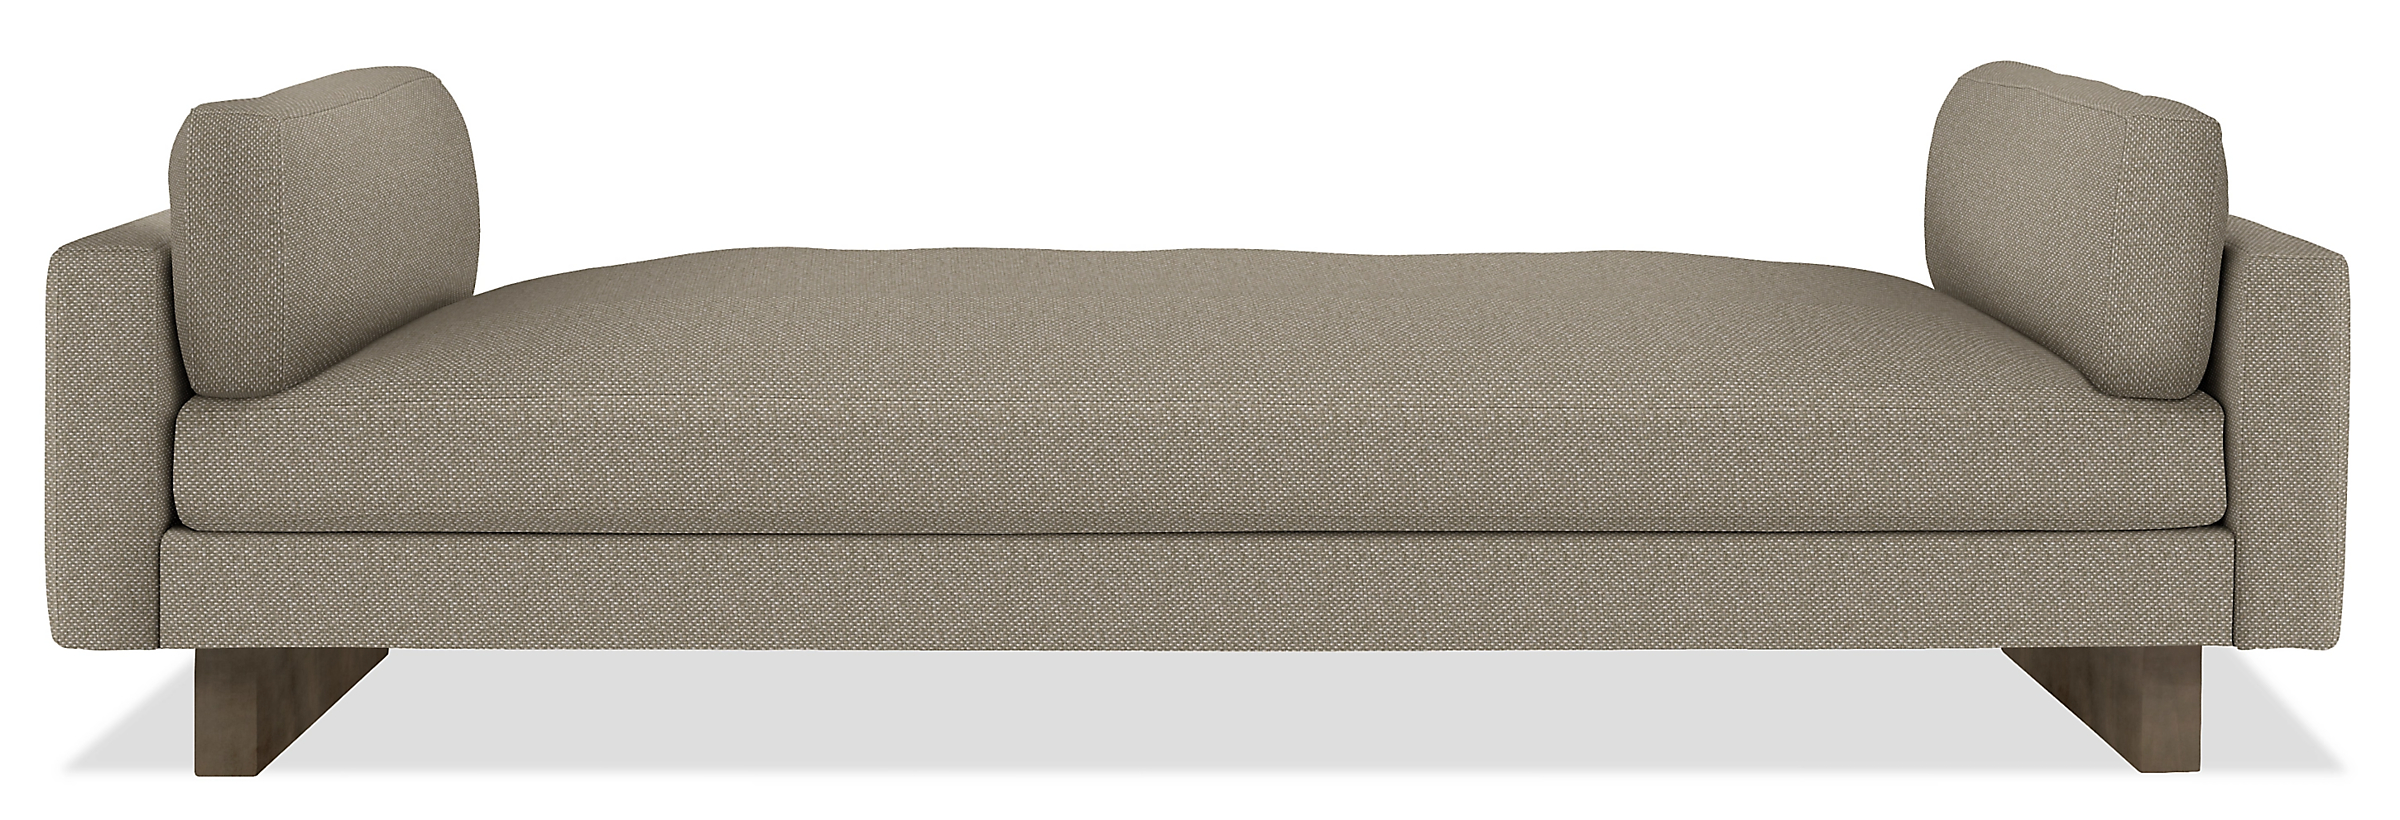 Pierson 89" Daybed in Arin Grey Fabric with Charcoal